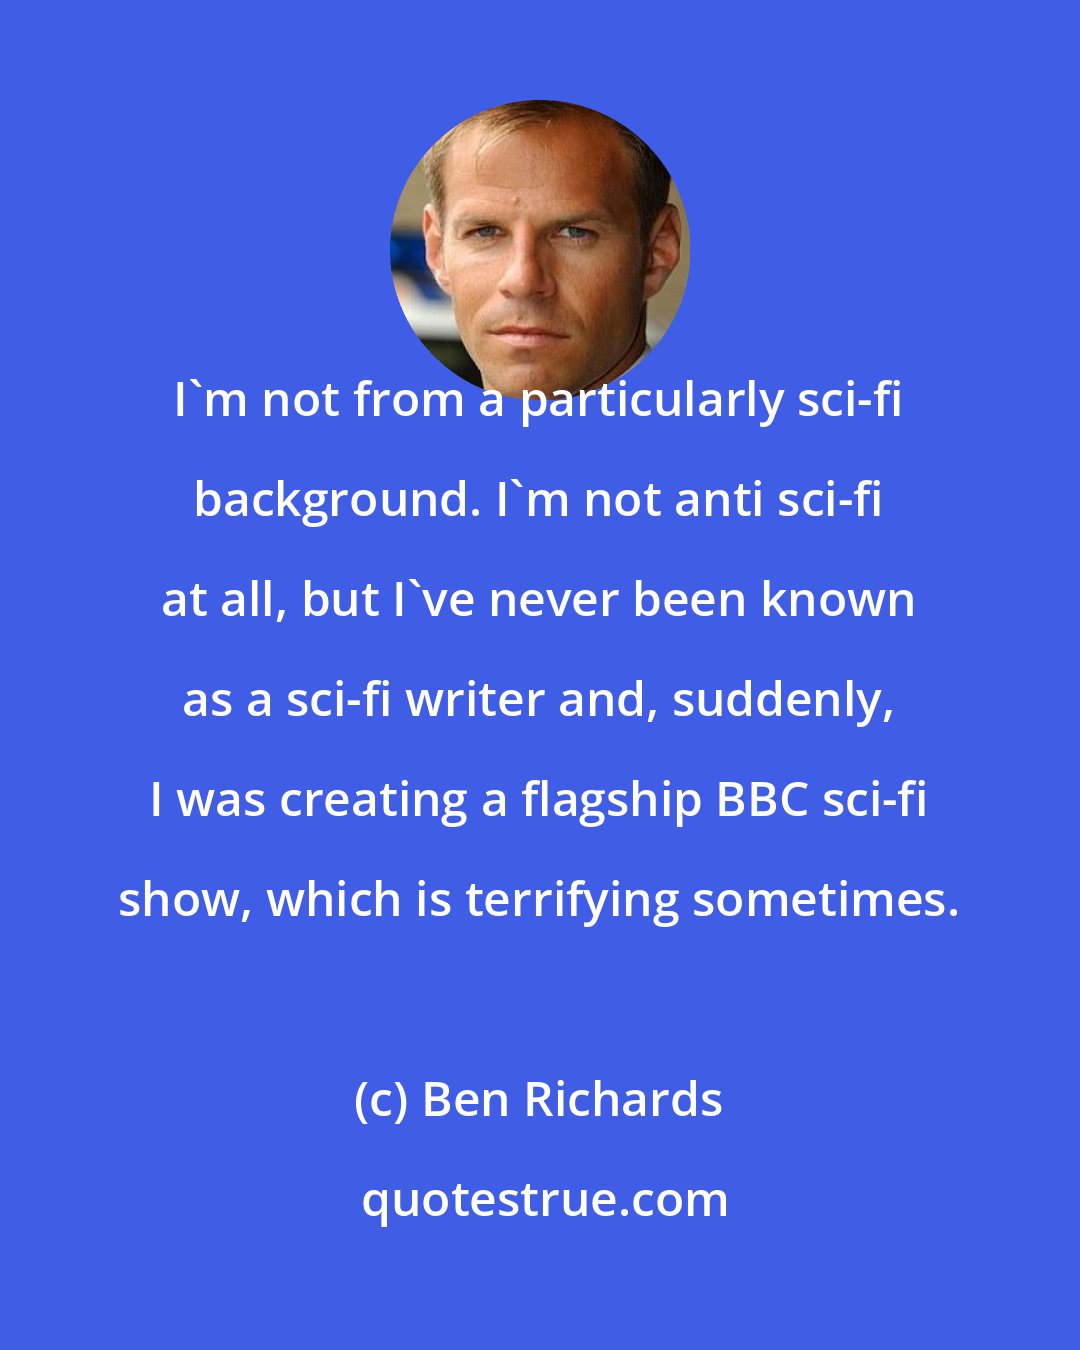 Ben Richards: I'm not from a particularly sci-fi background. I'm not anti sci-fi at all, but I've never been known as a sci-fi writer and, suddenly, I was creating a flagship BBC sci-fi show, which is terrifying sometimes.